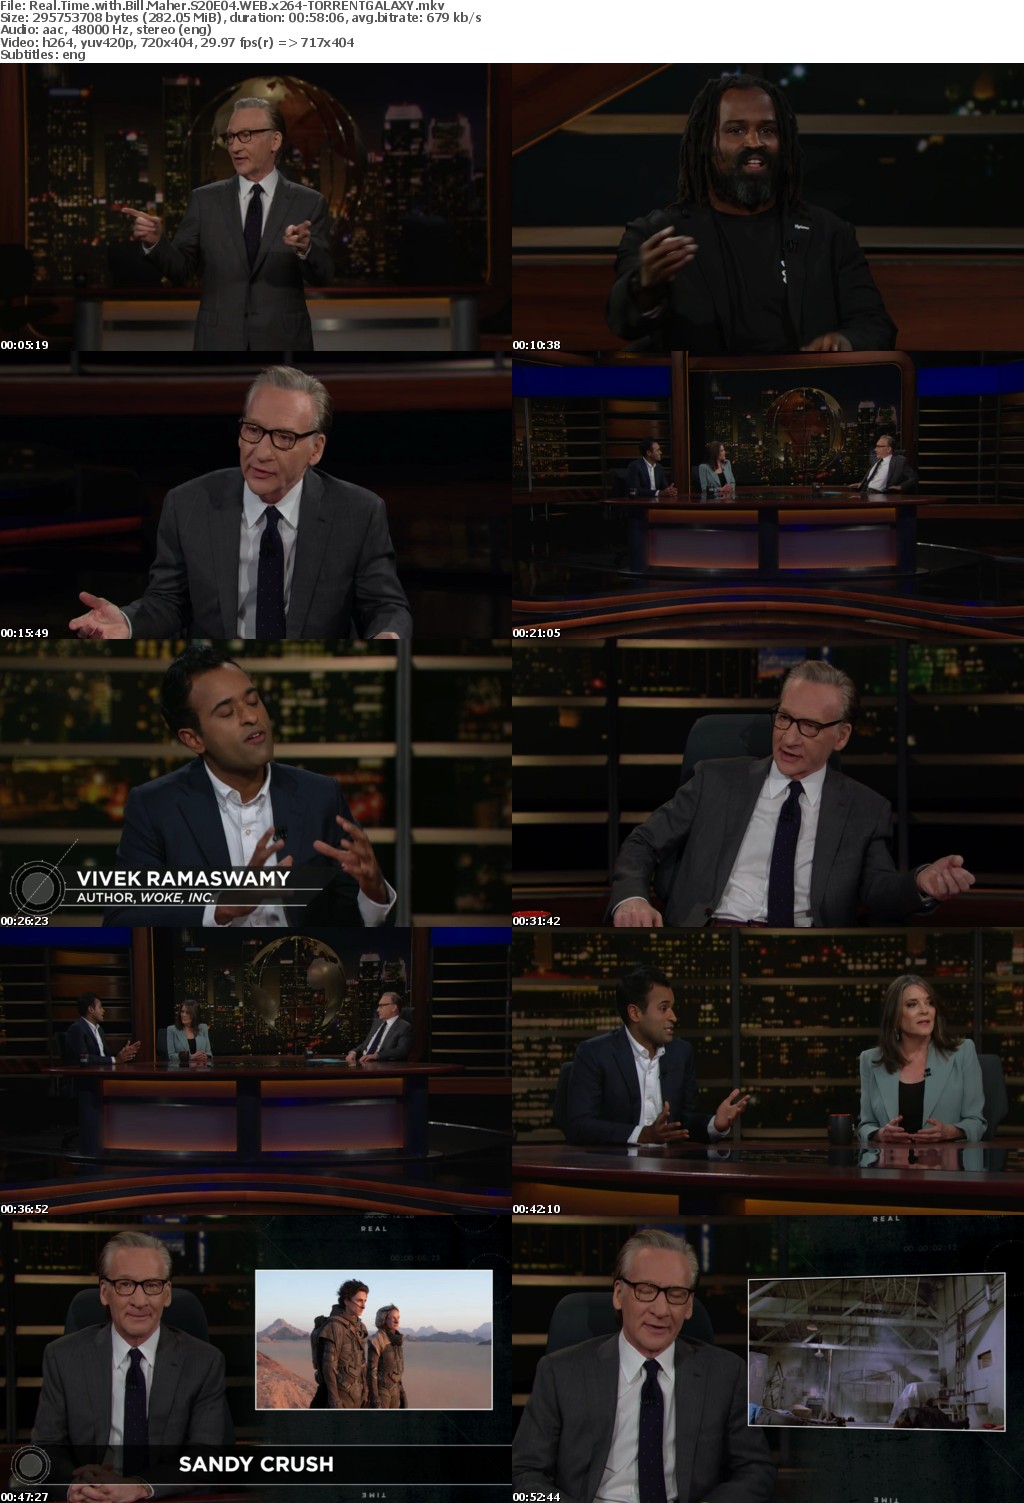 Real Time with Bill Maher S20E04 WEB x264-GALAXY